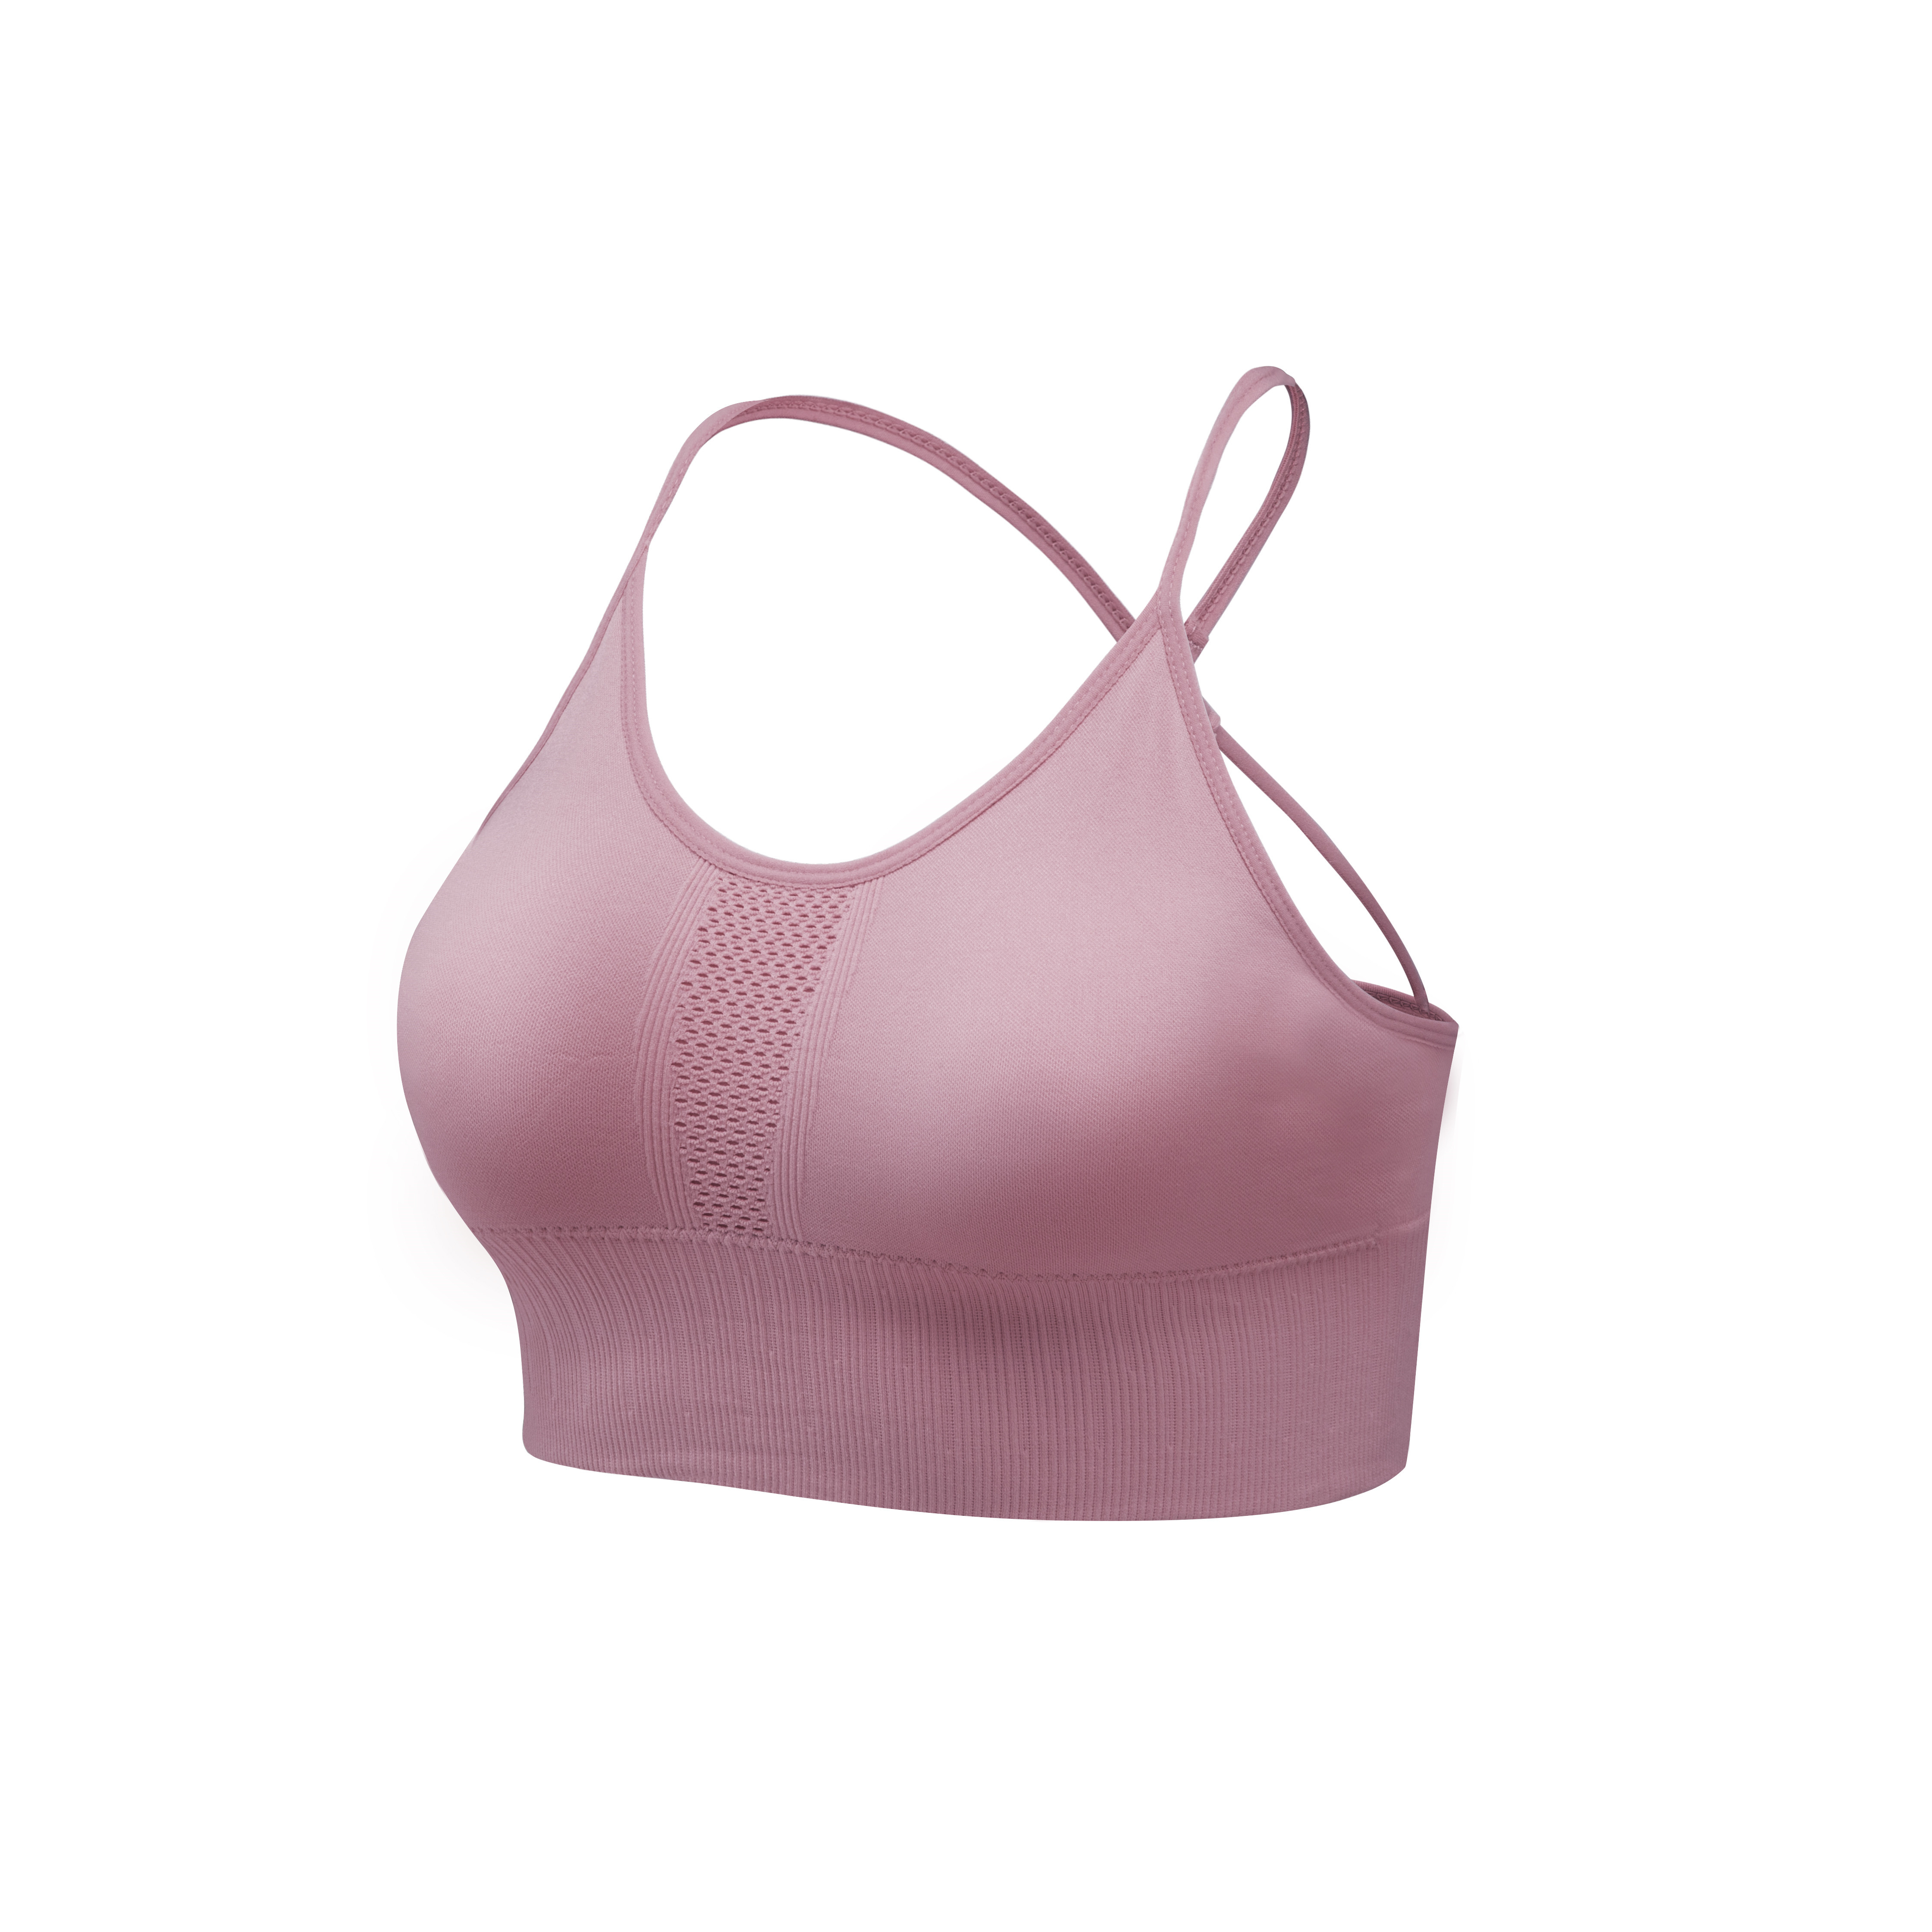 Comfortable Low Impact Strappy Sports Bra Wirefree Padded Yoga Top With  Criss Cross Back Design From Lucky_lulu1222, $18.33